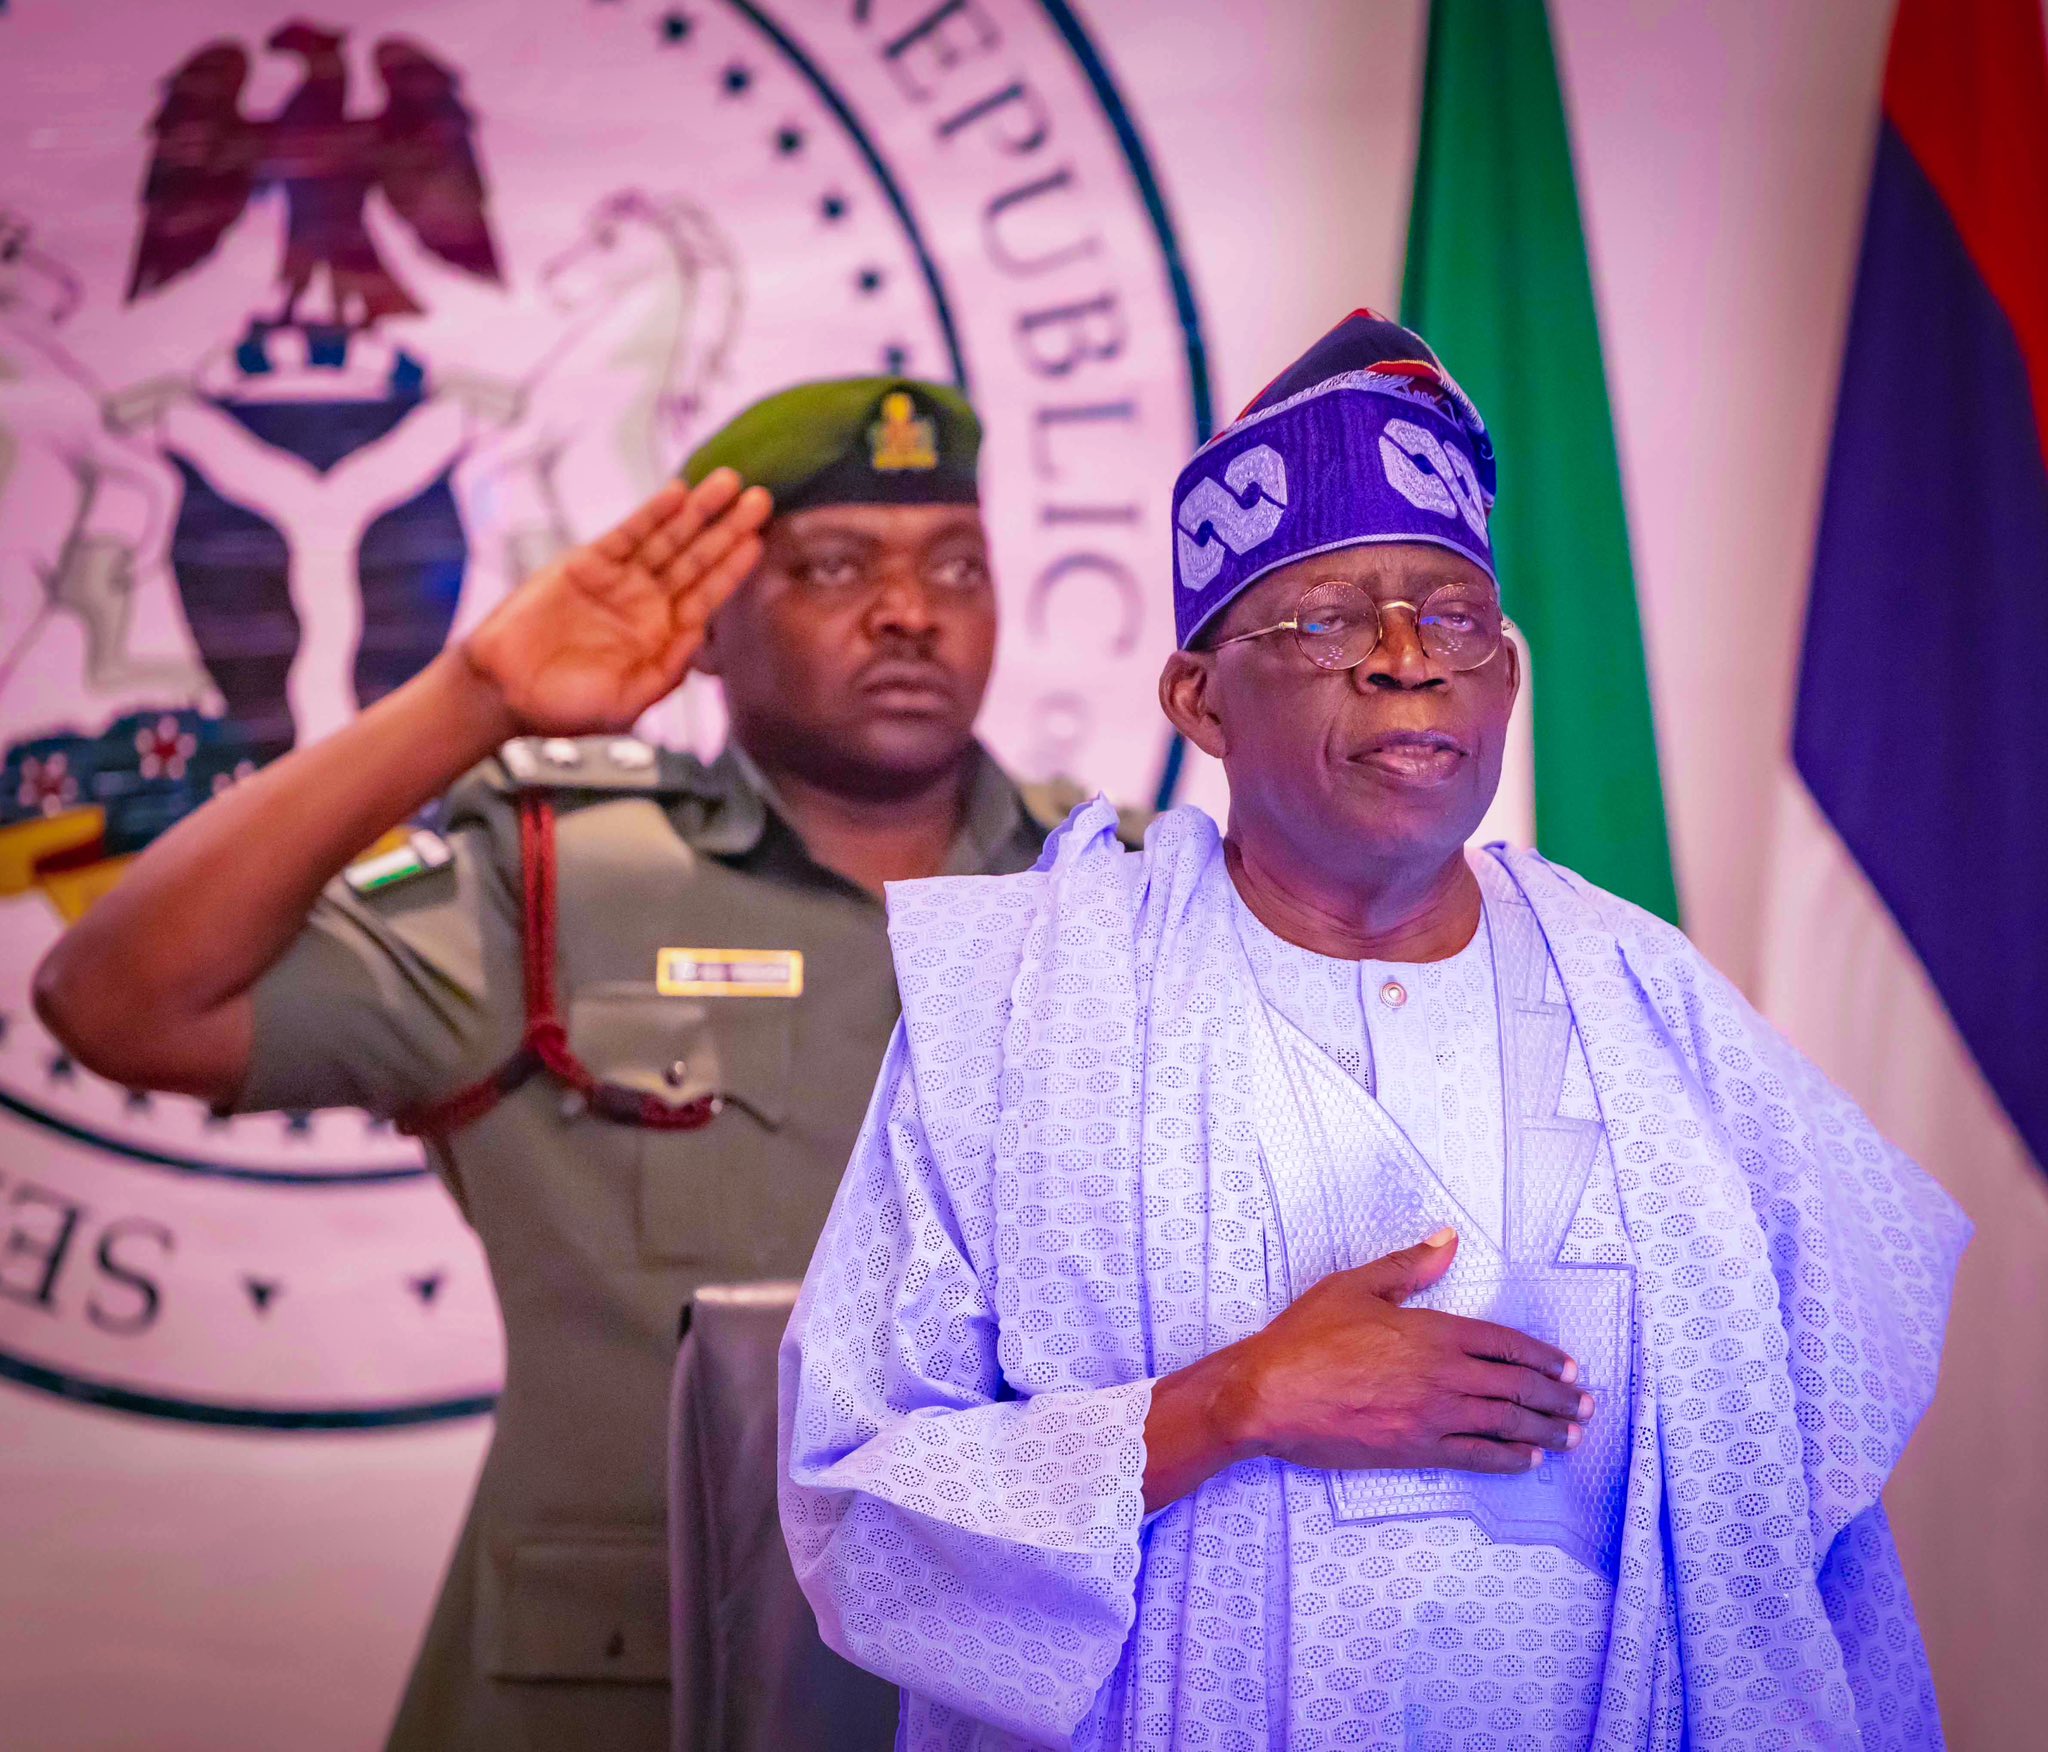 The President, Commander-in-Chief of the Armed Forces, Federal Republic of Nigeria, Bola Ahmed Tinubu